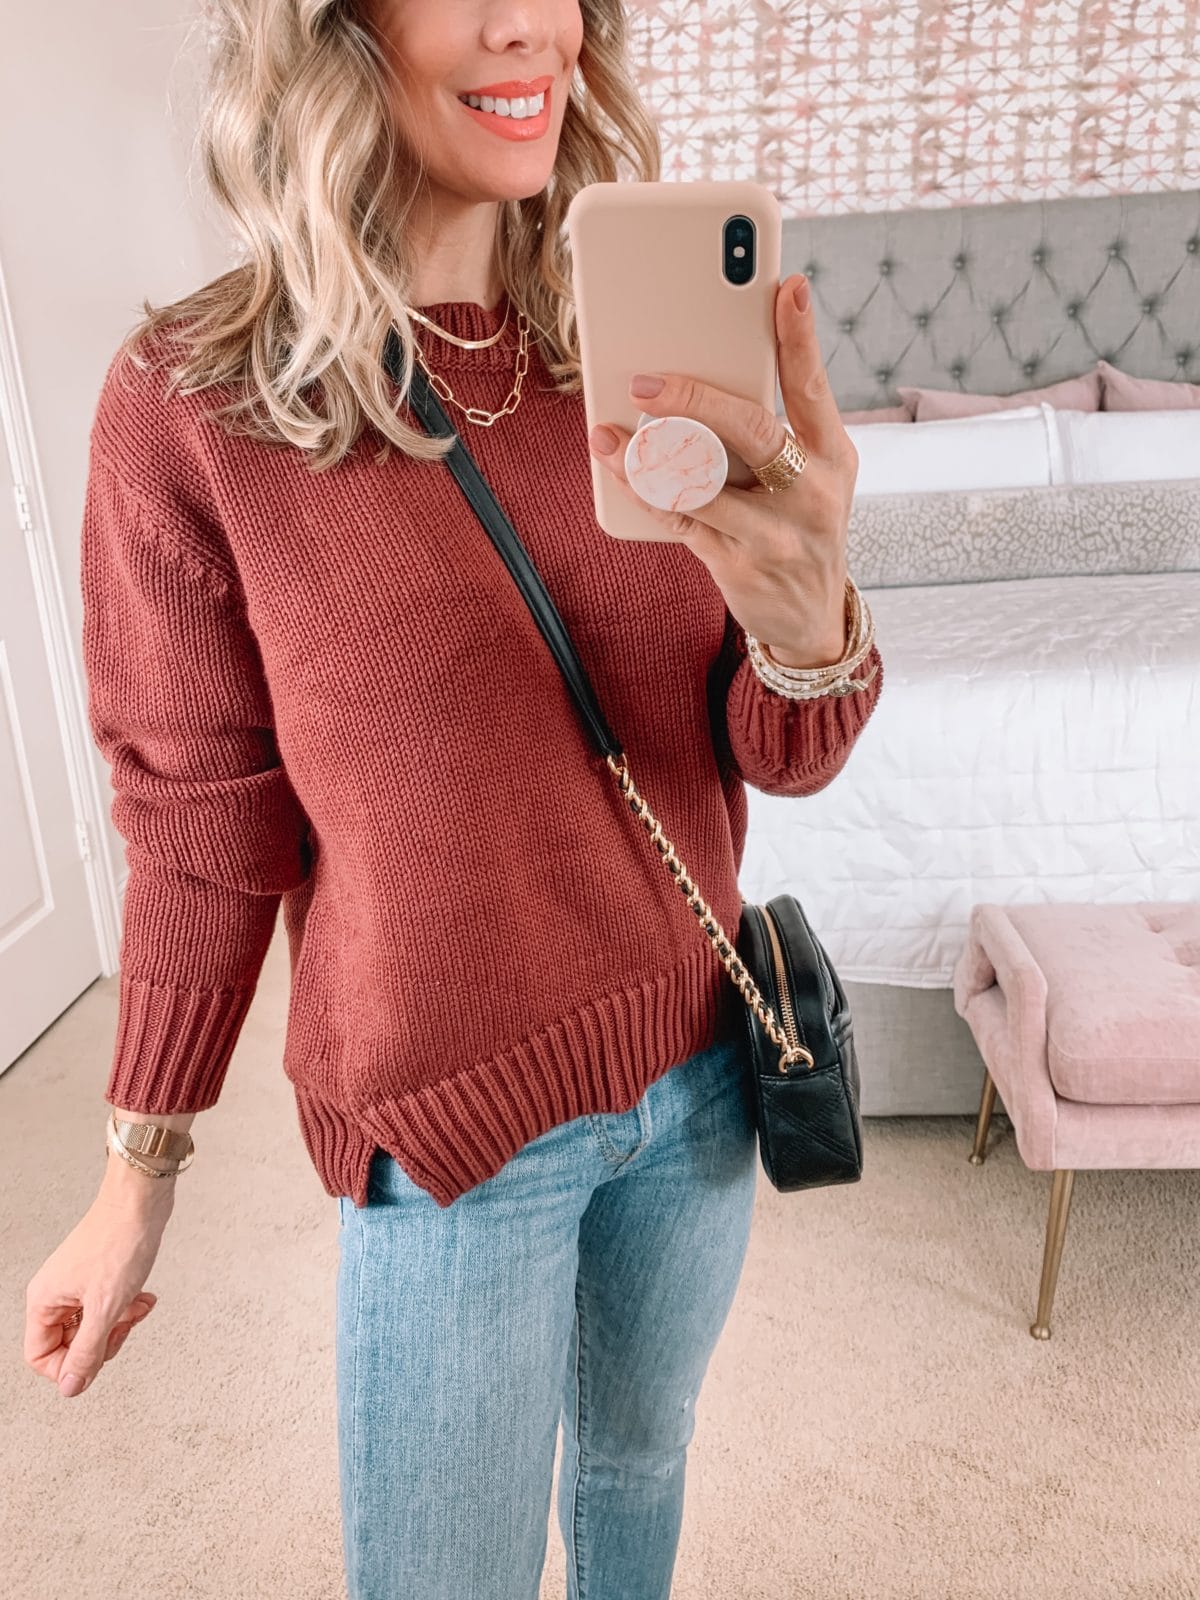 Amazon Fashion Faves, Sweater, Jeans, Booties, Crossbody Bag